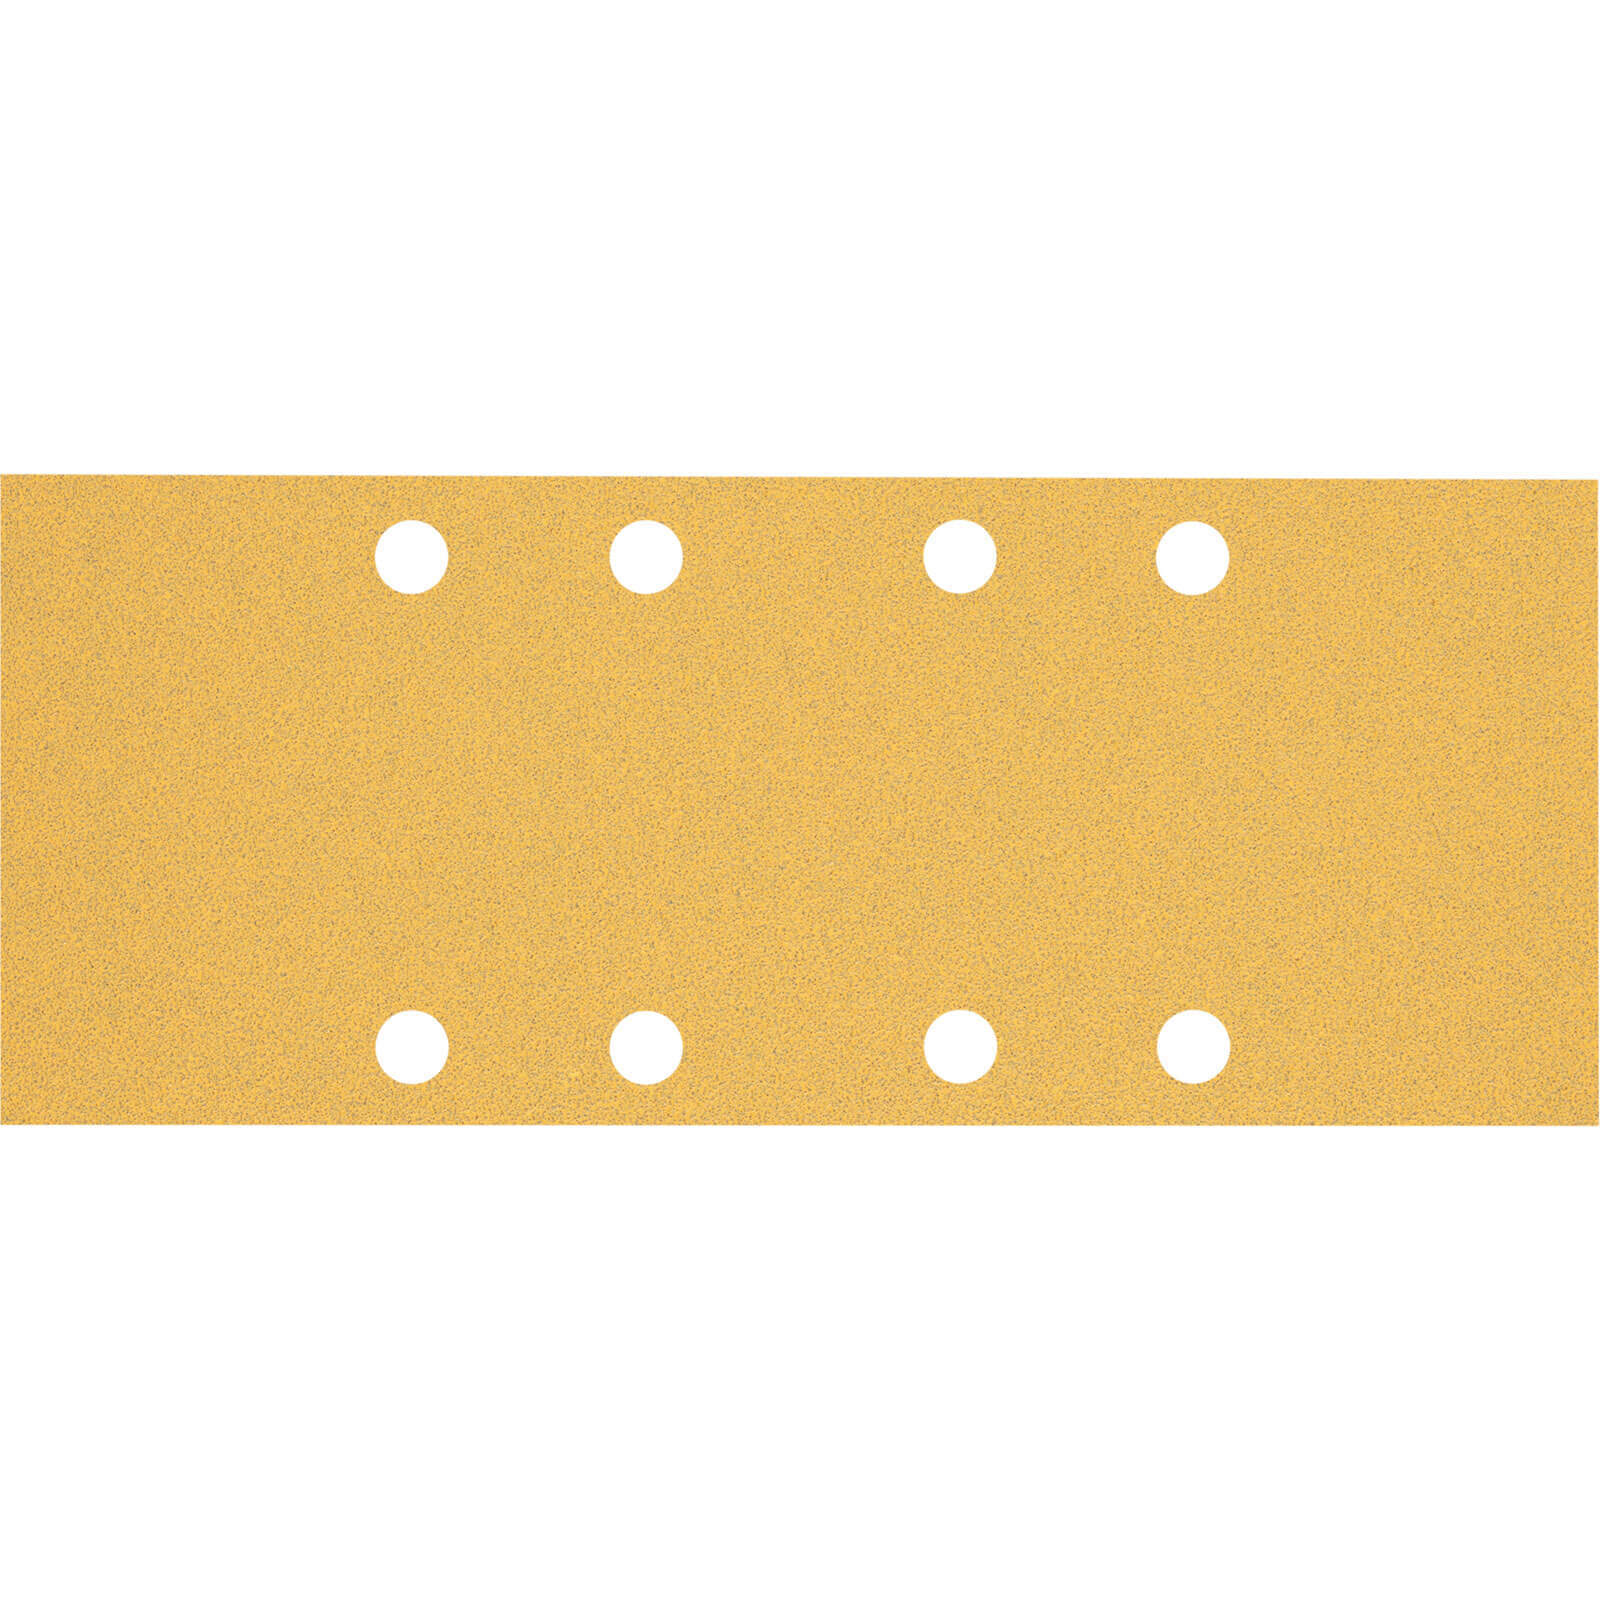 Image of Bosch Expert C470 Best for Wood and Paint Sanding Sheets 93mm x 230mm 80g Pack of 10